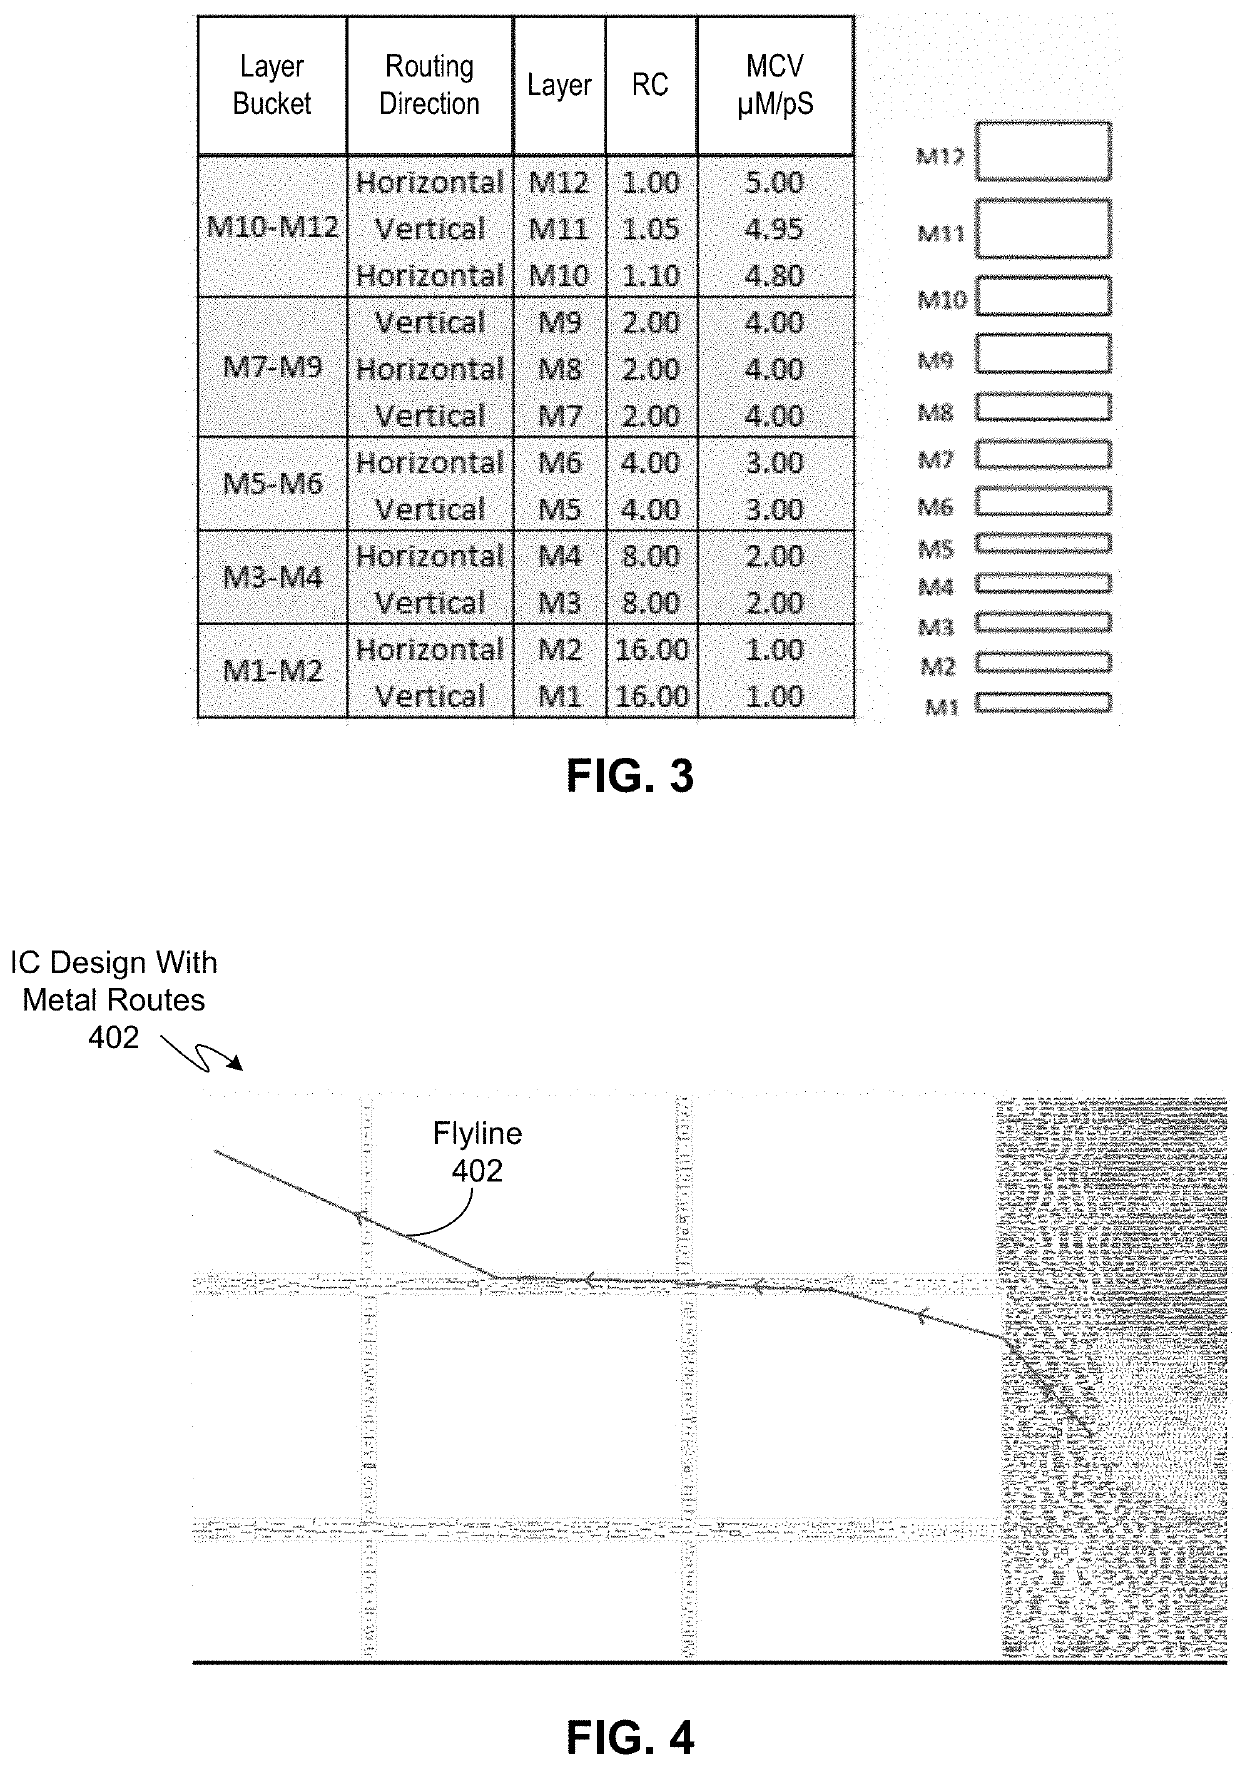 Using a layer performance metric (LPM) to perform placement, routing, and/or optimization of an integrated circuit (IC) design